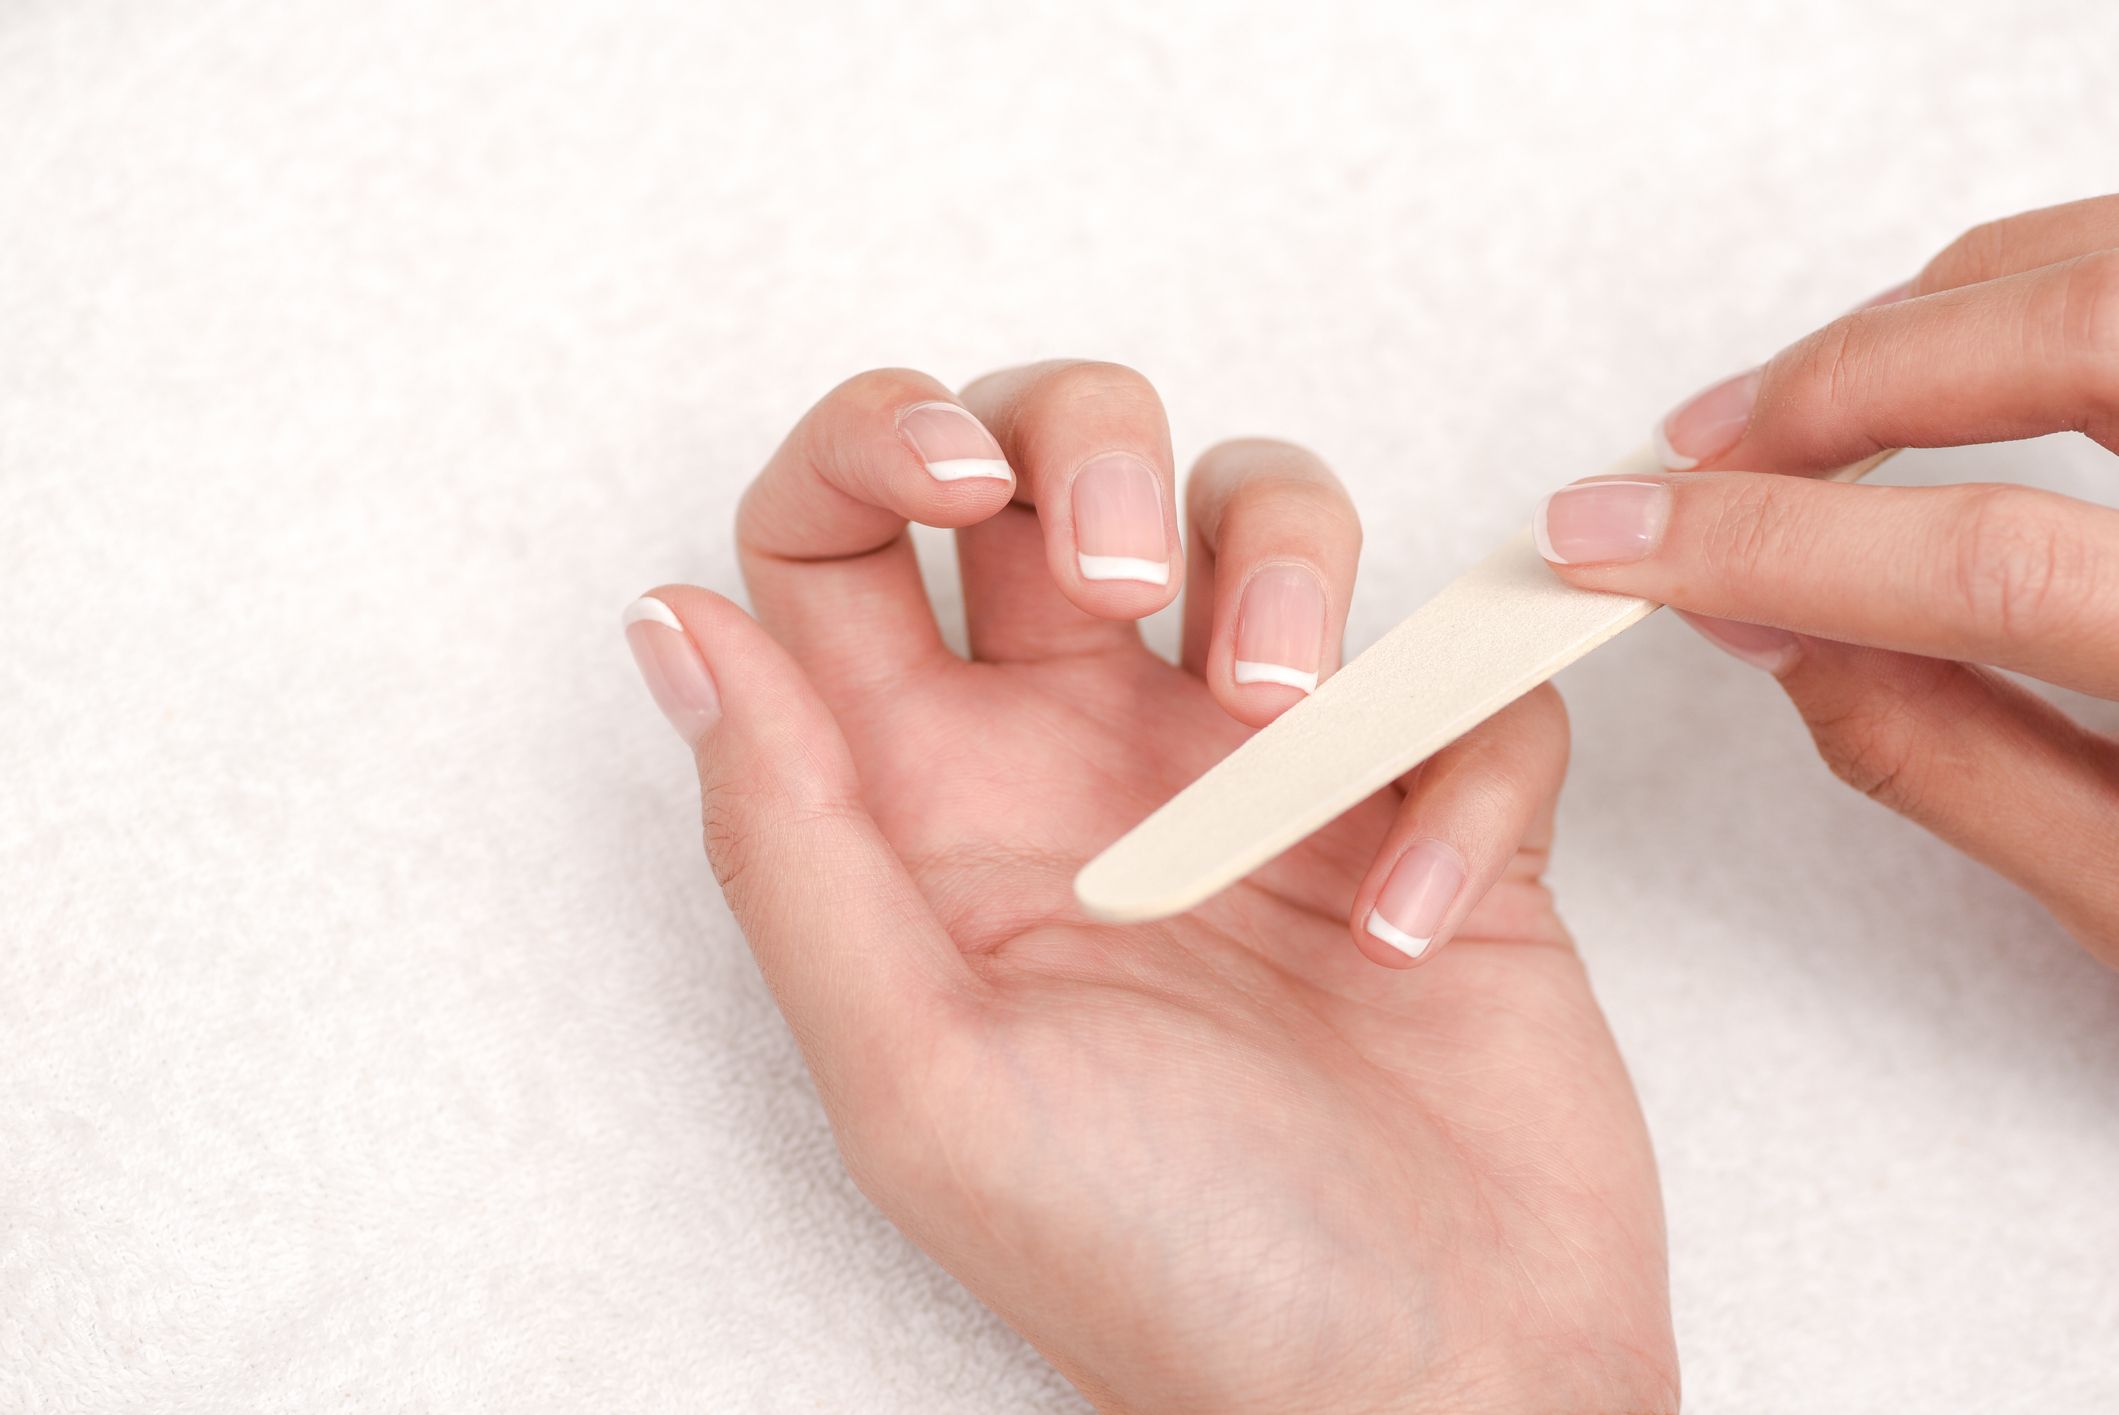 What Does It Mean if a Girl Paints Her Nails White? – ORLY